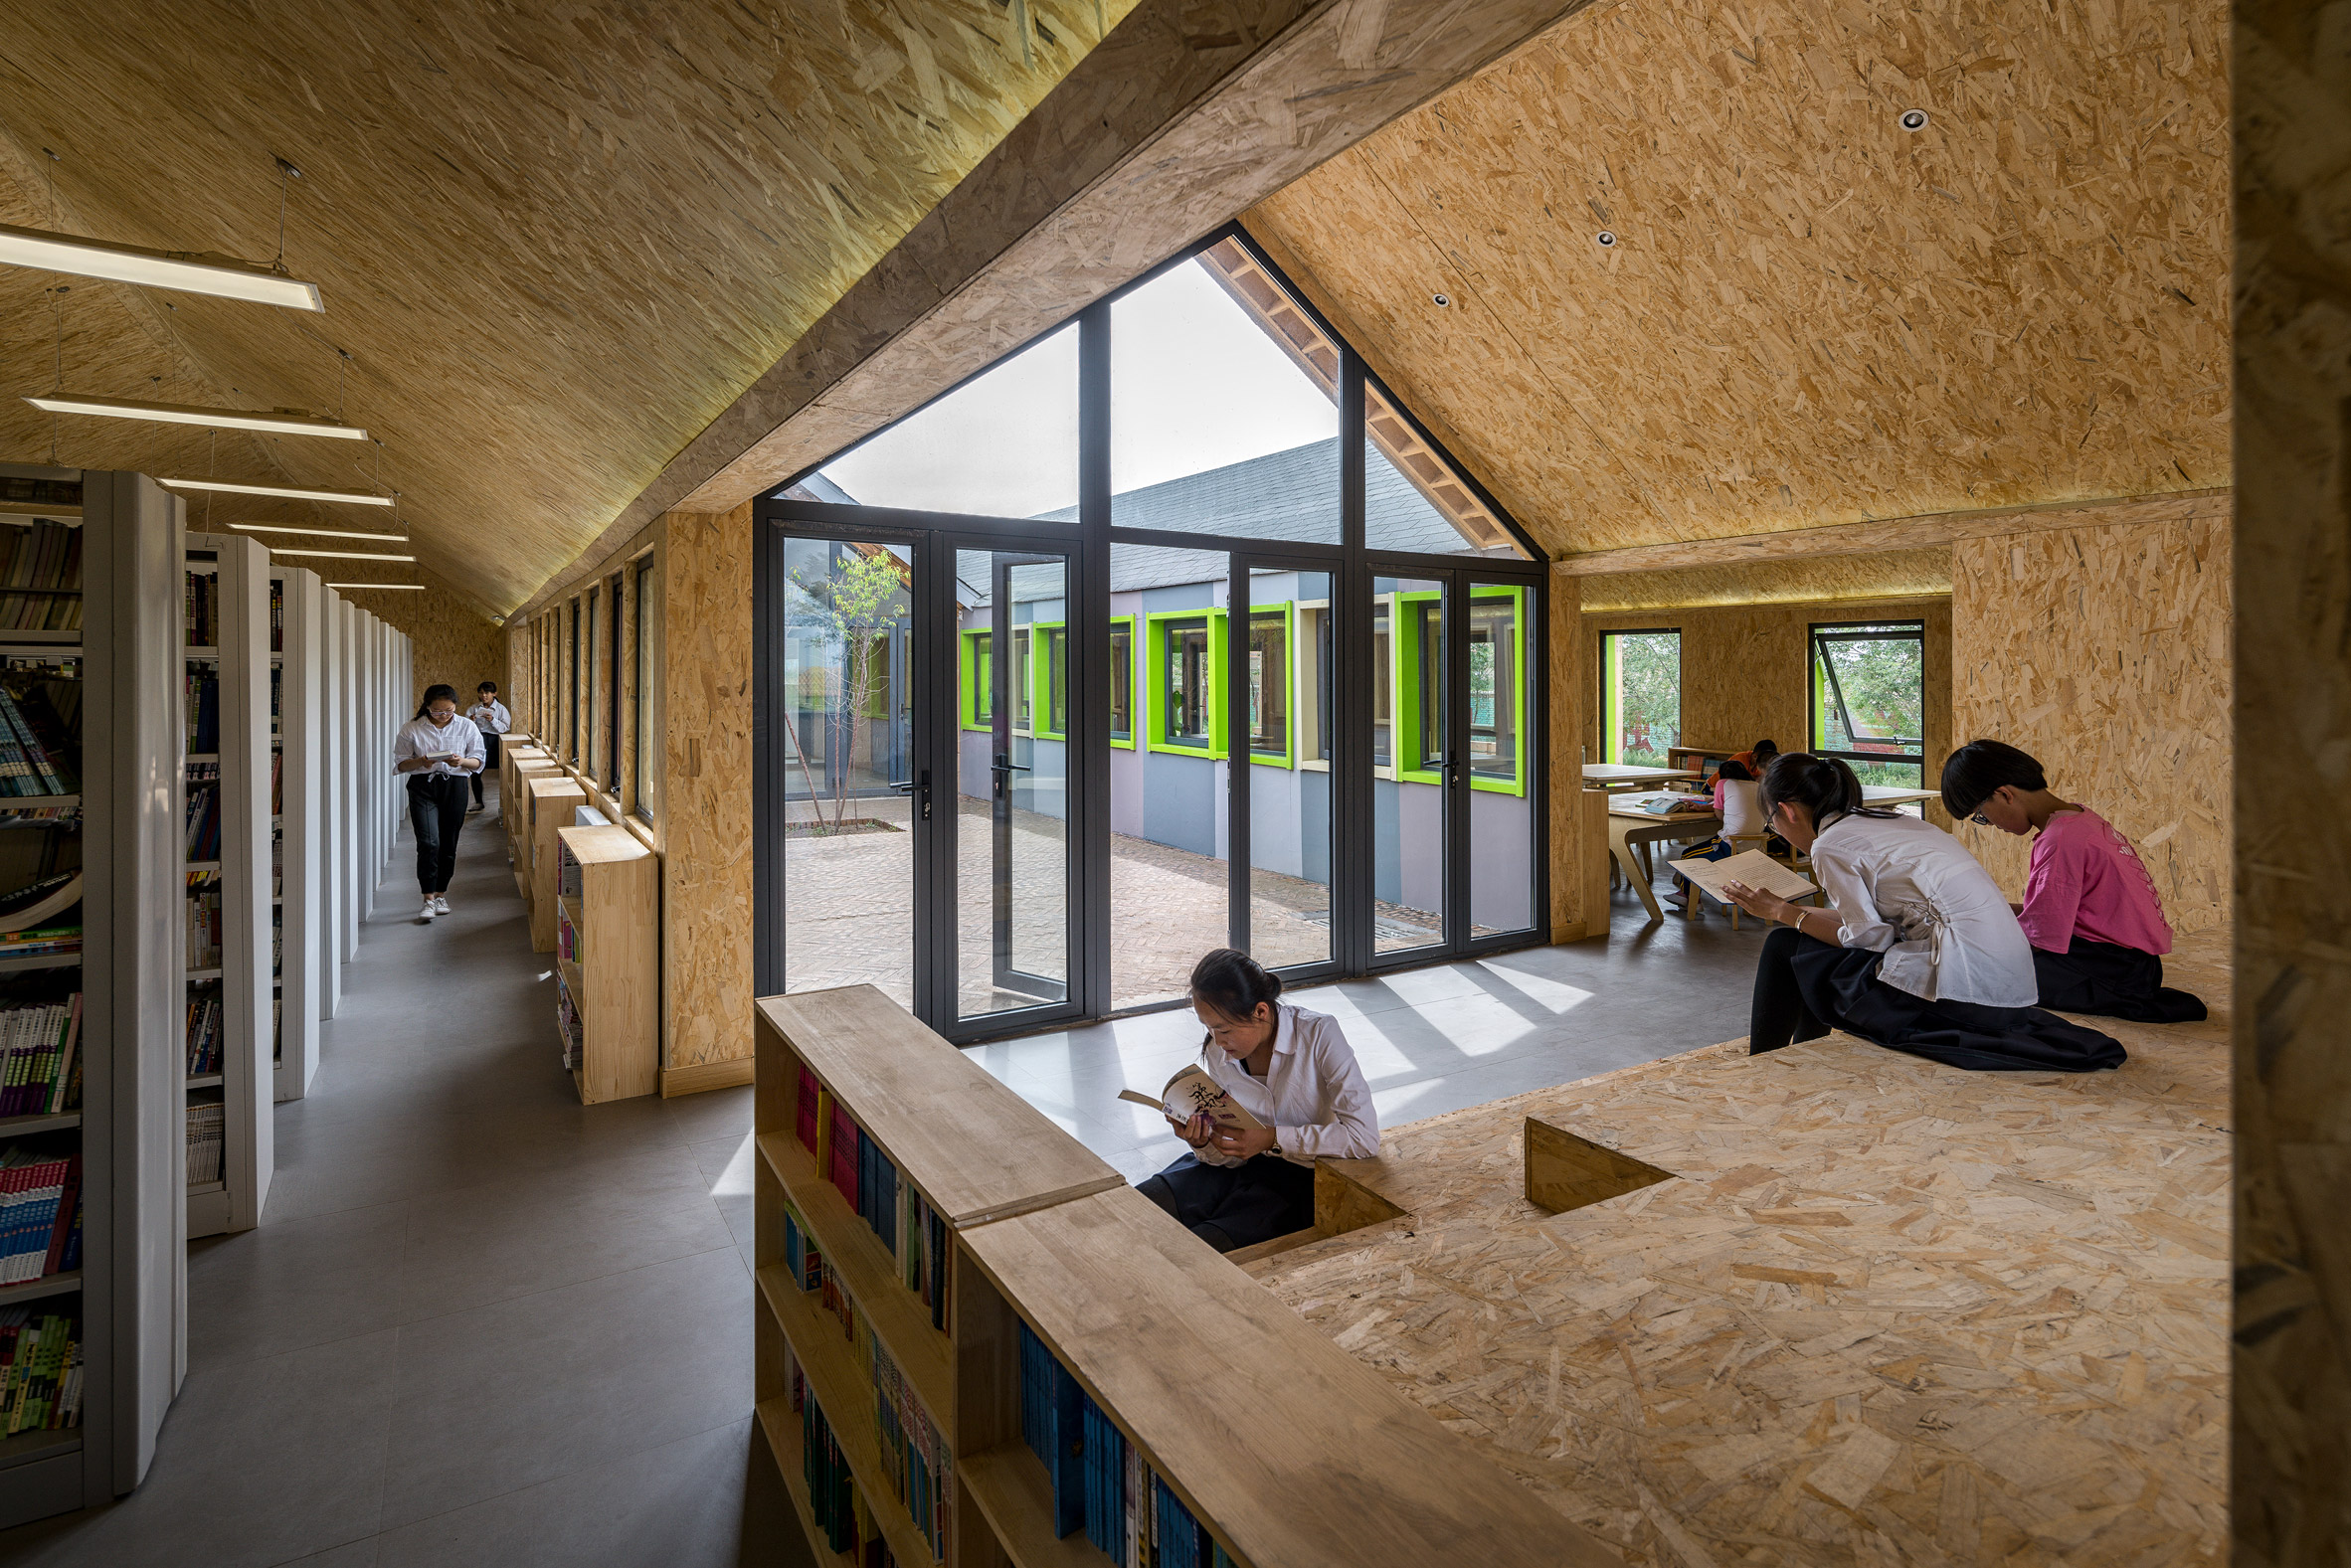 Huxia Star Library by Dots Architects